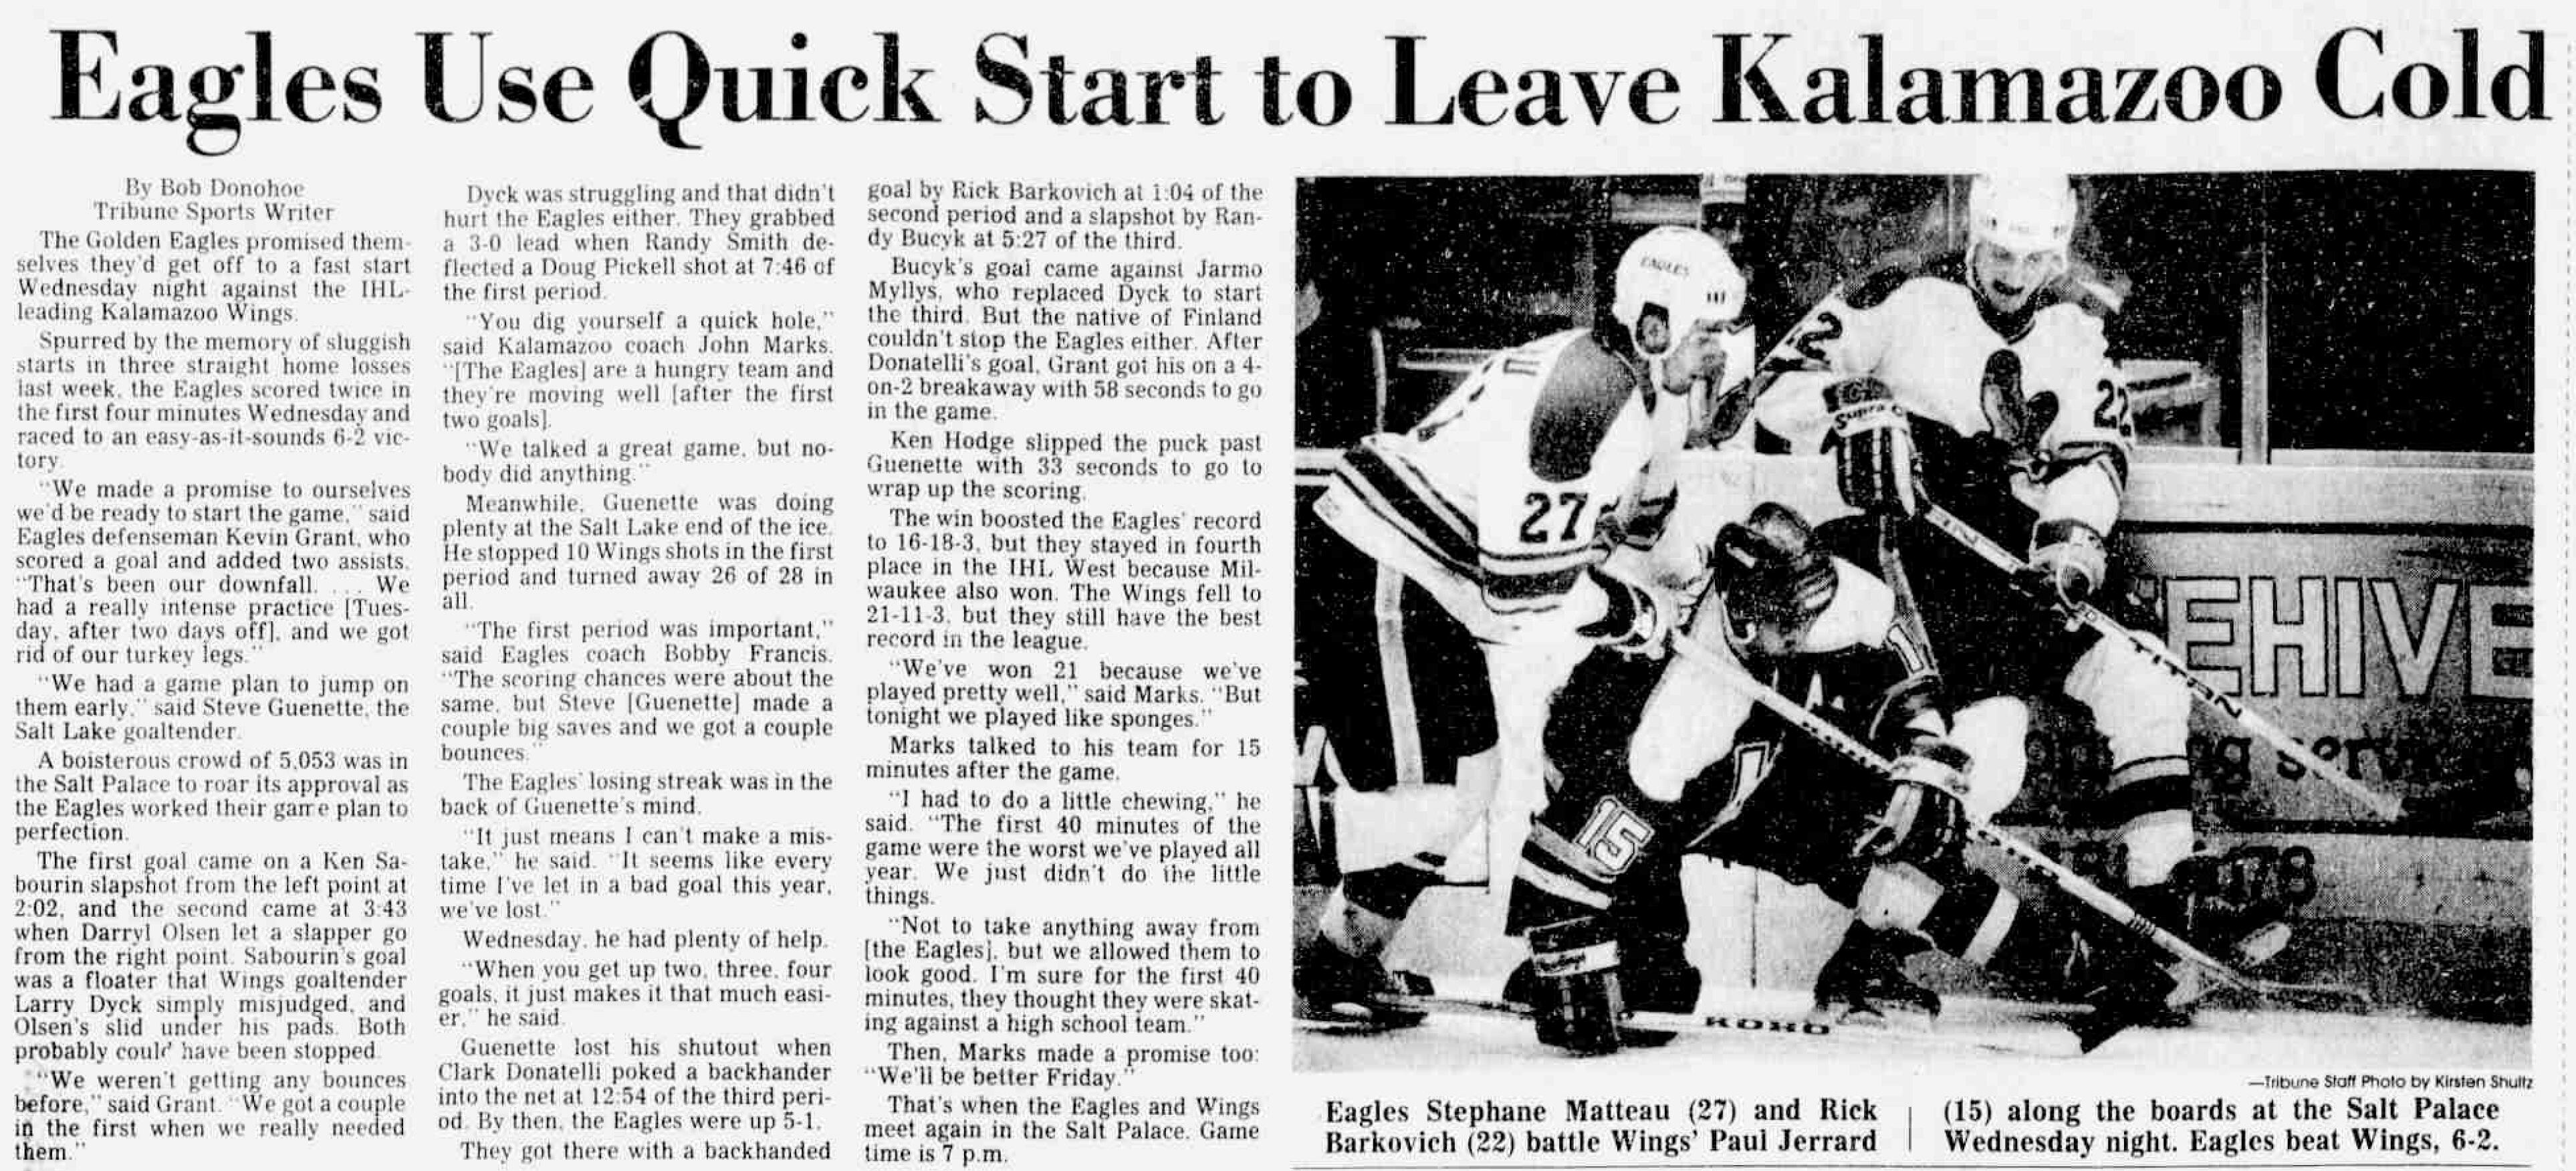 (The Salt Lake Tribune) A print page from Thursday, Dec. 28, 1989, shows an image and story from a Golden Eagles hockey game.